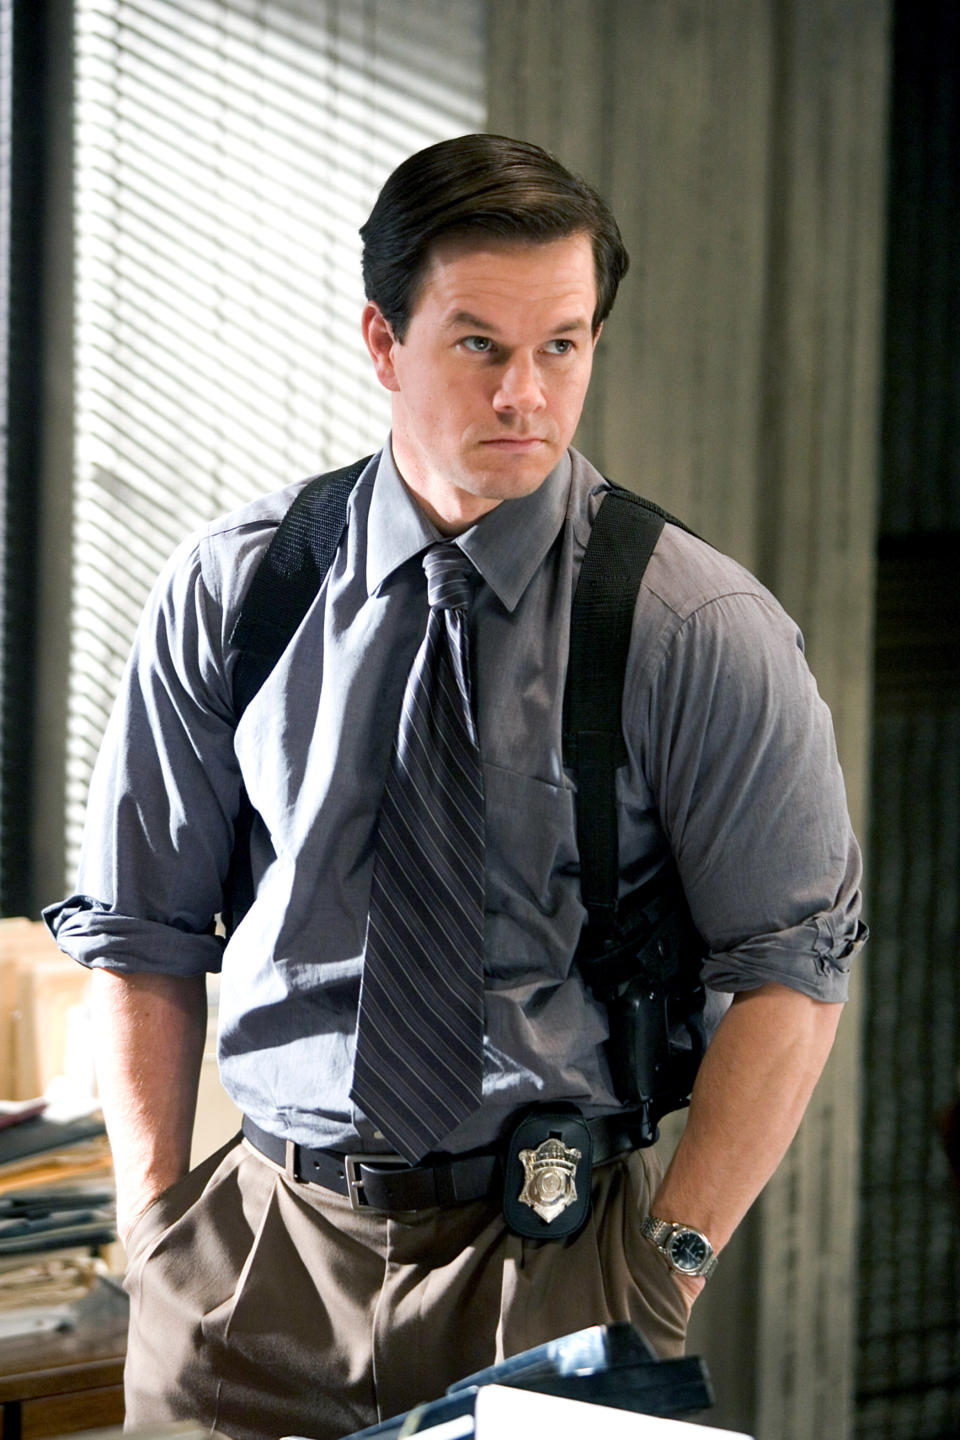 Mark Wahlberg in "The Departed"